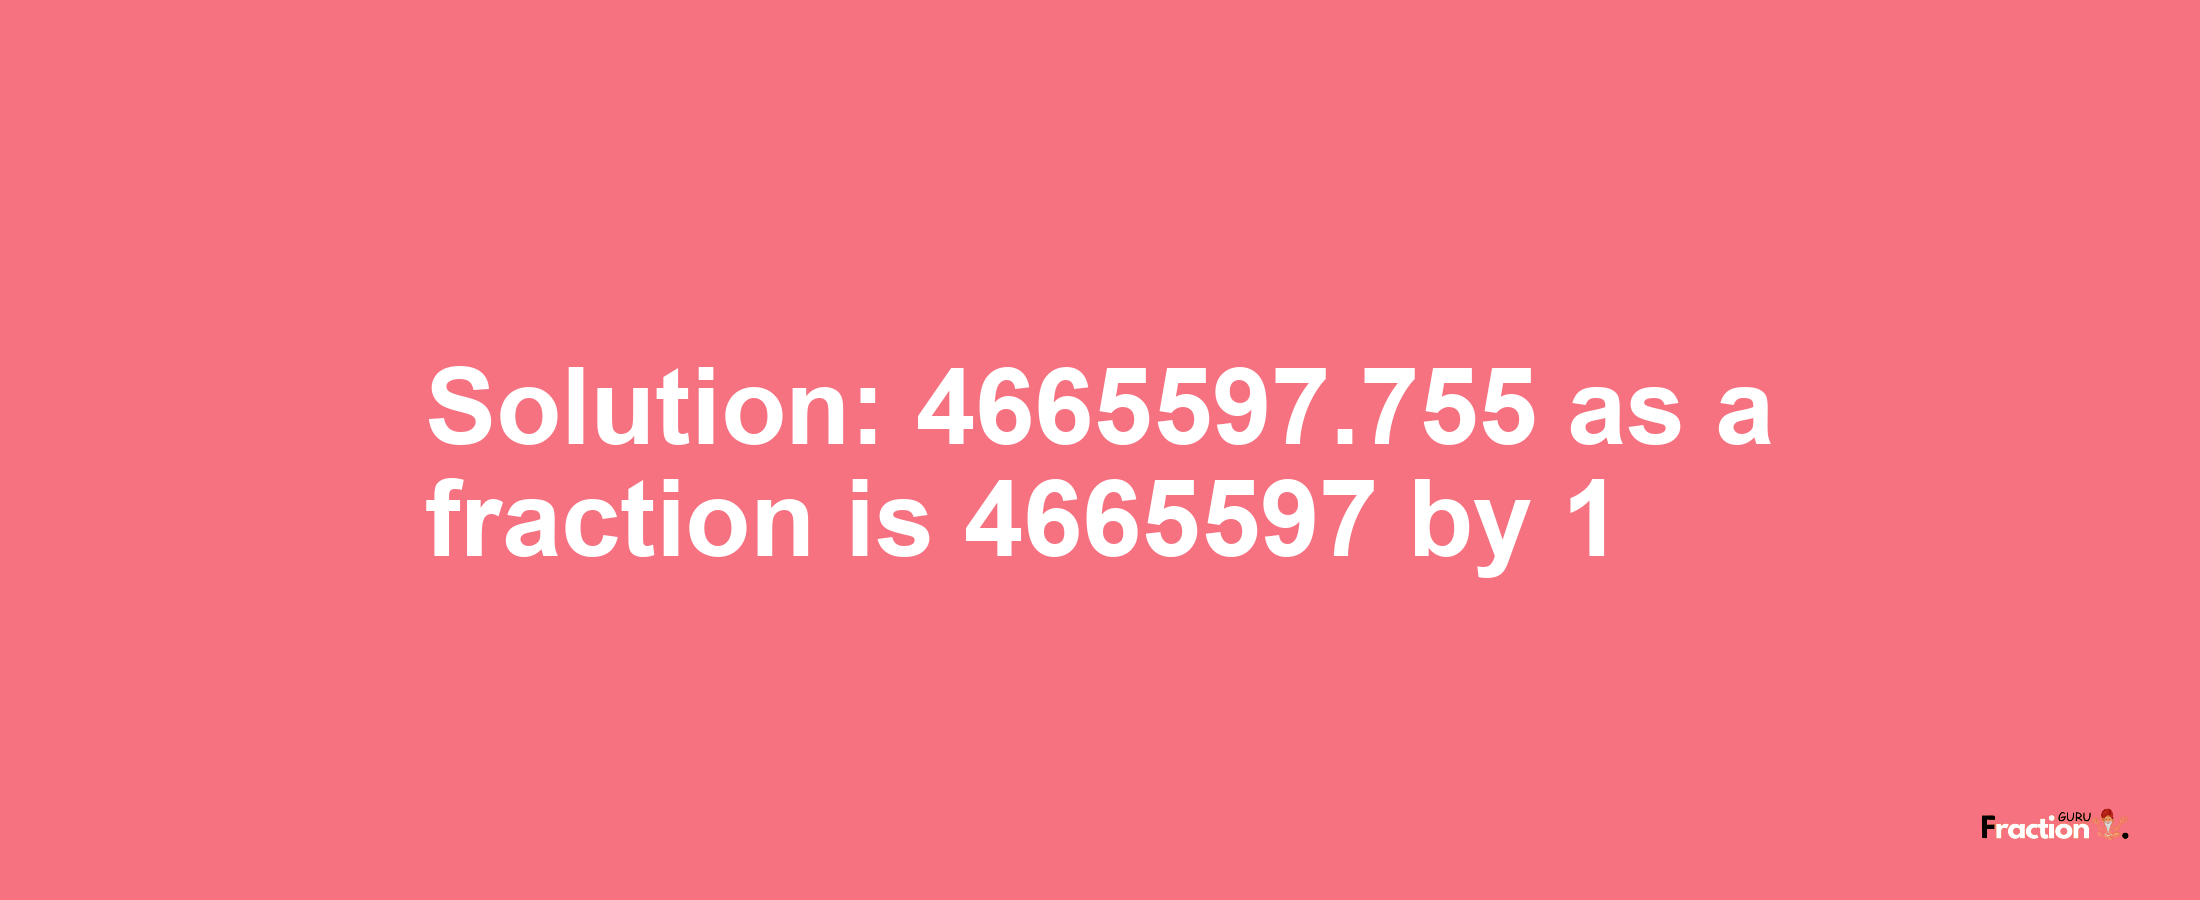 Solution:4665597.755 as a fraction is 4665597/1